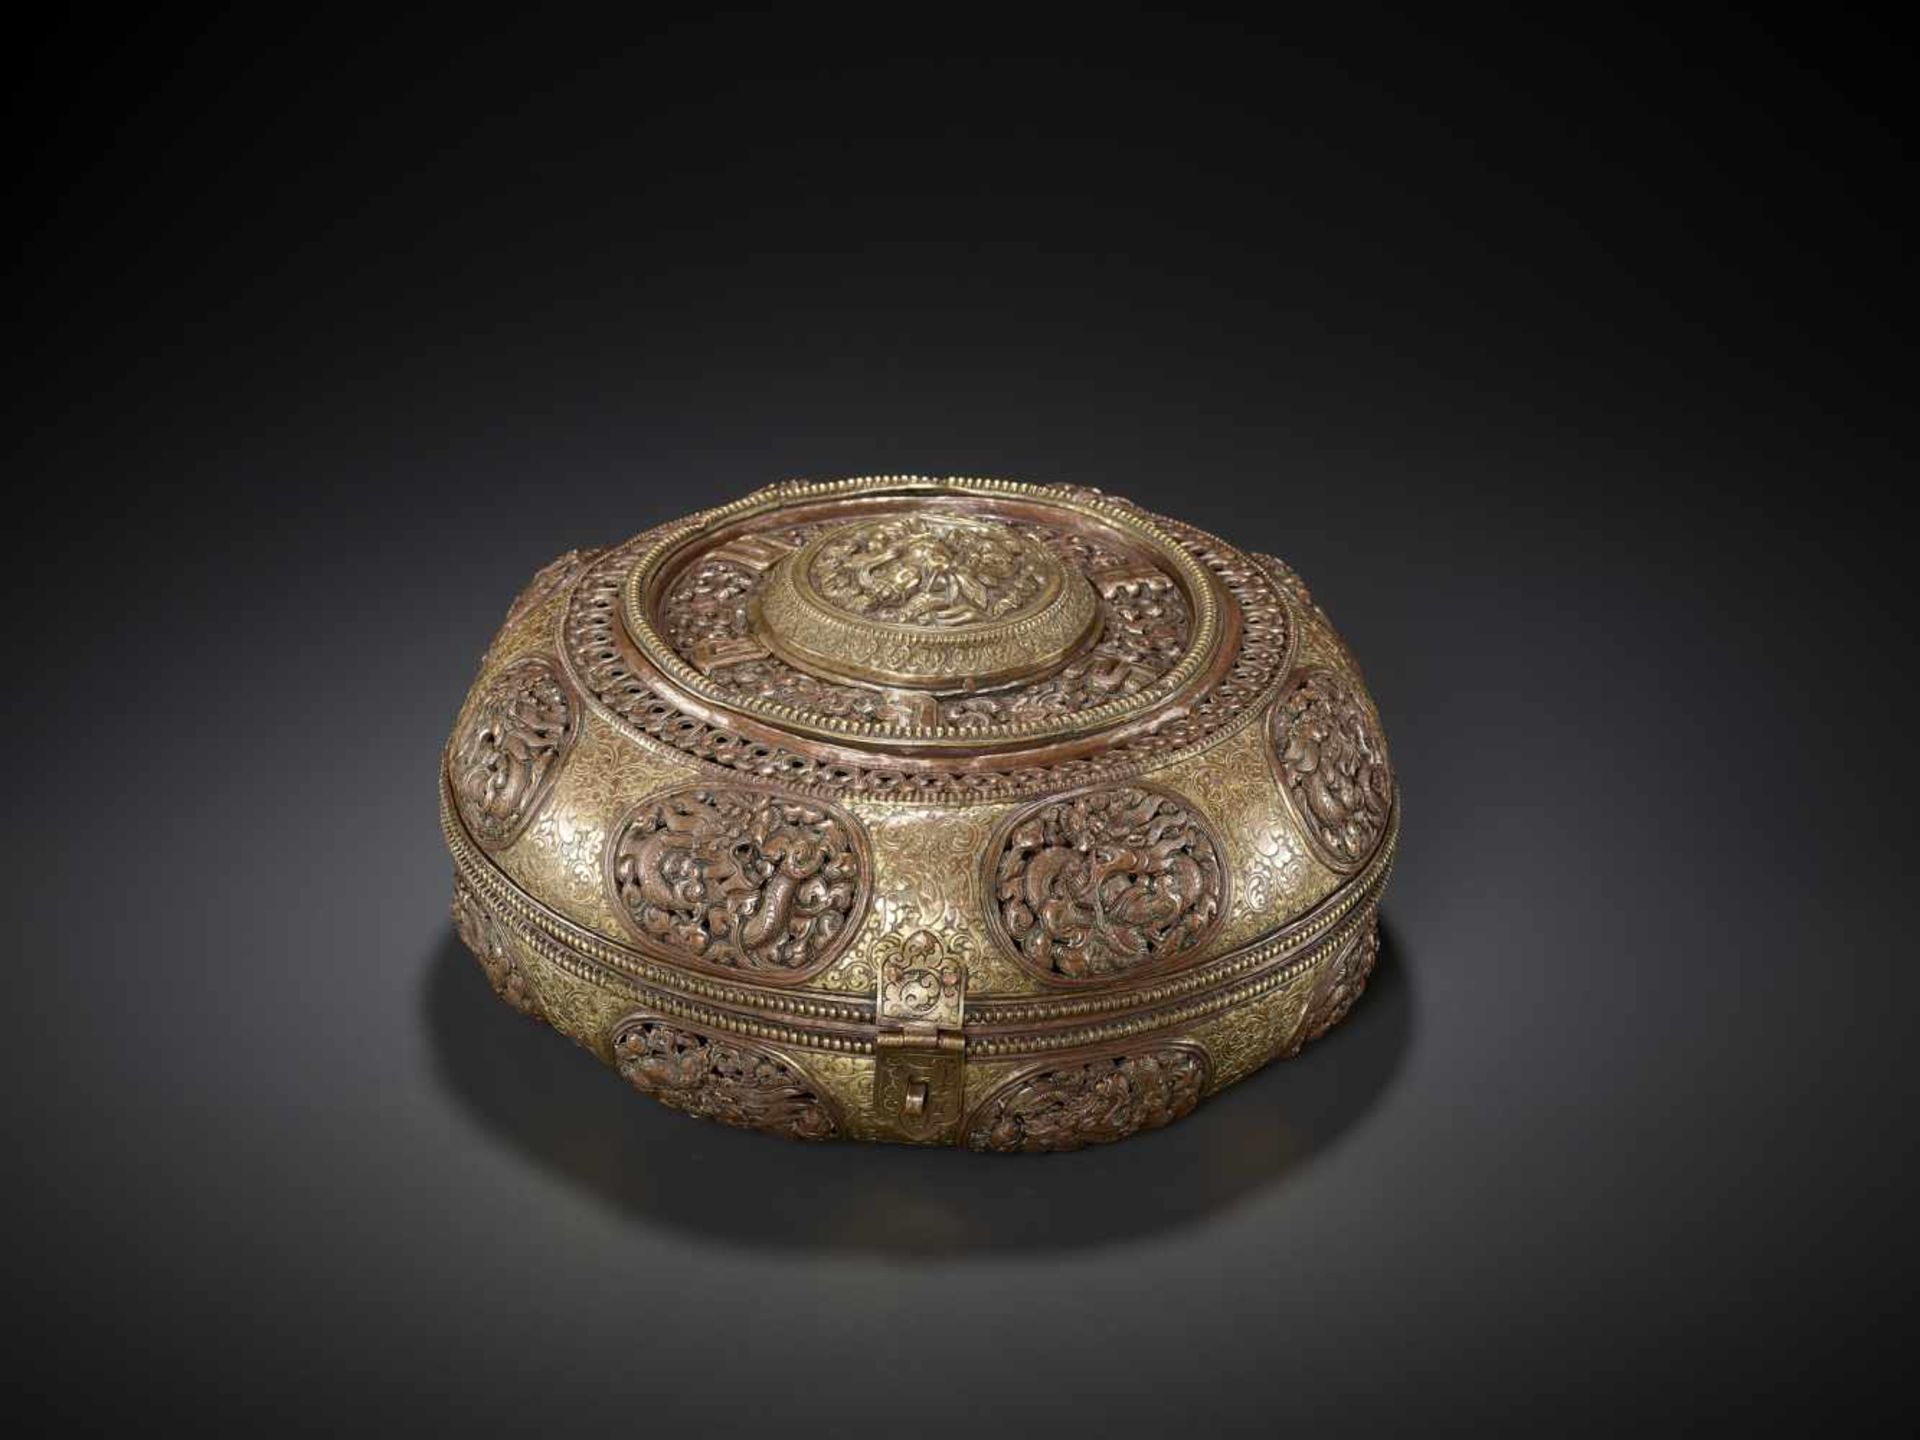 A GILT COPPER REPOUSSÉ RICE CONTAINER Tibet, 17th – 18th century. Finely engraved, embossed and - Image 8 of 9